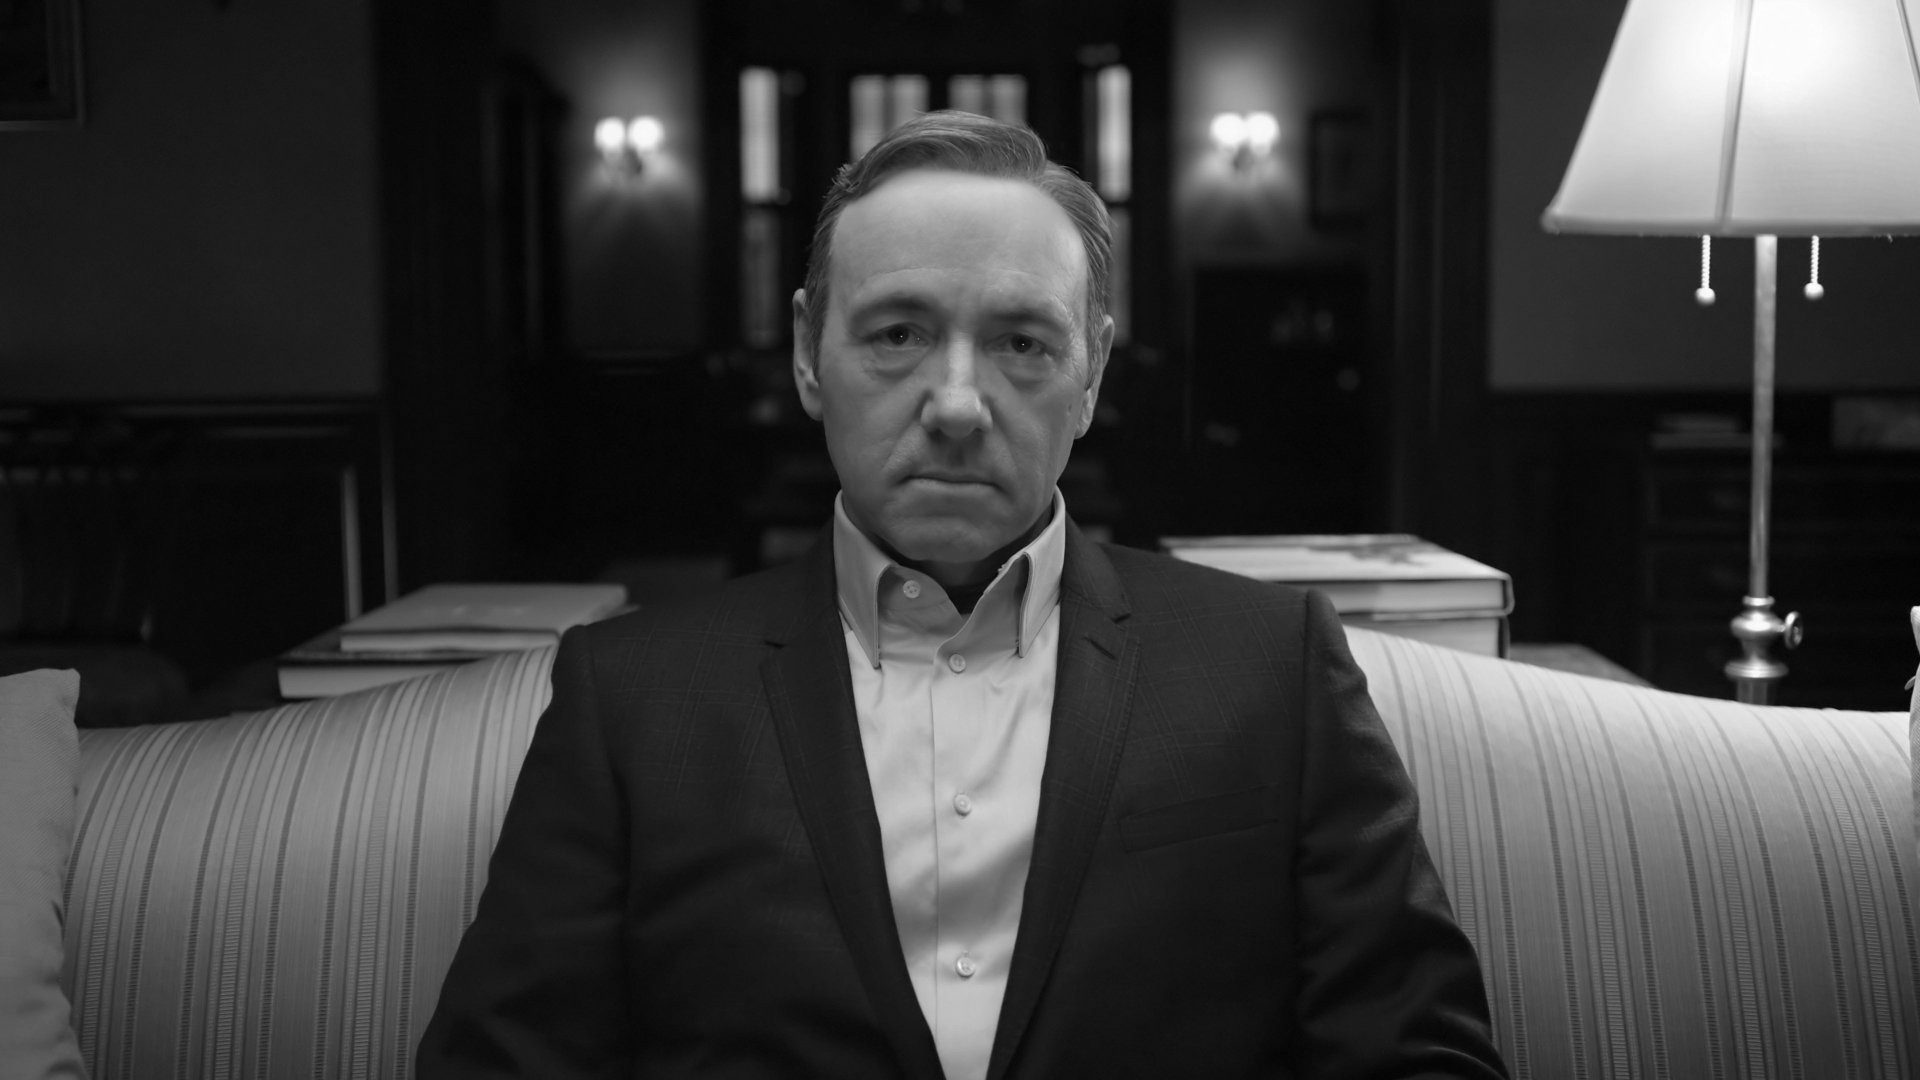 Download Kevin Spacey Tv Show House Of Cards 4k Ultra Hd Wallpaper